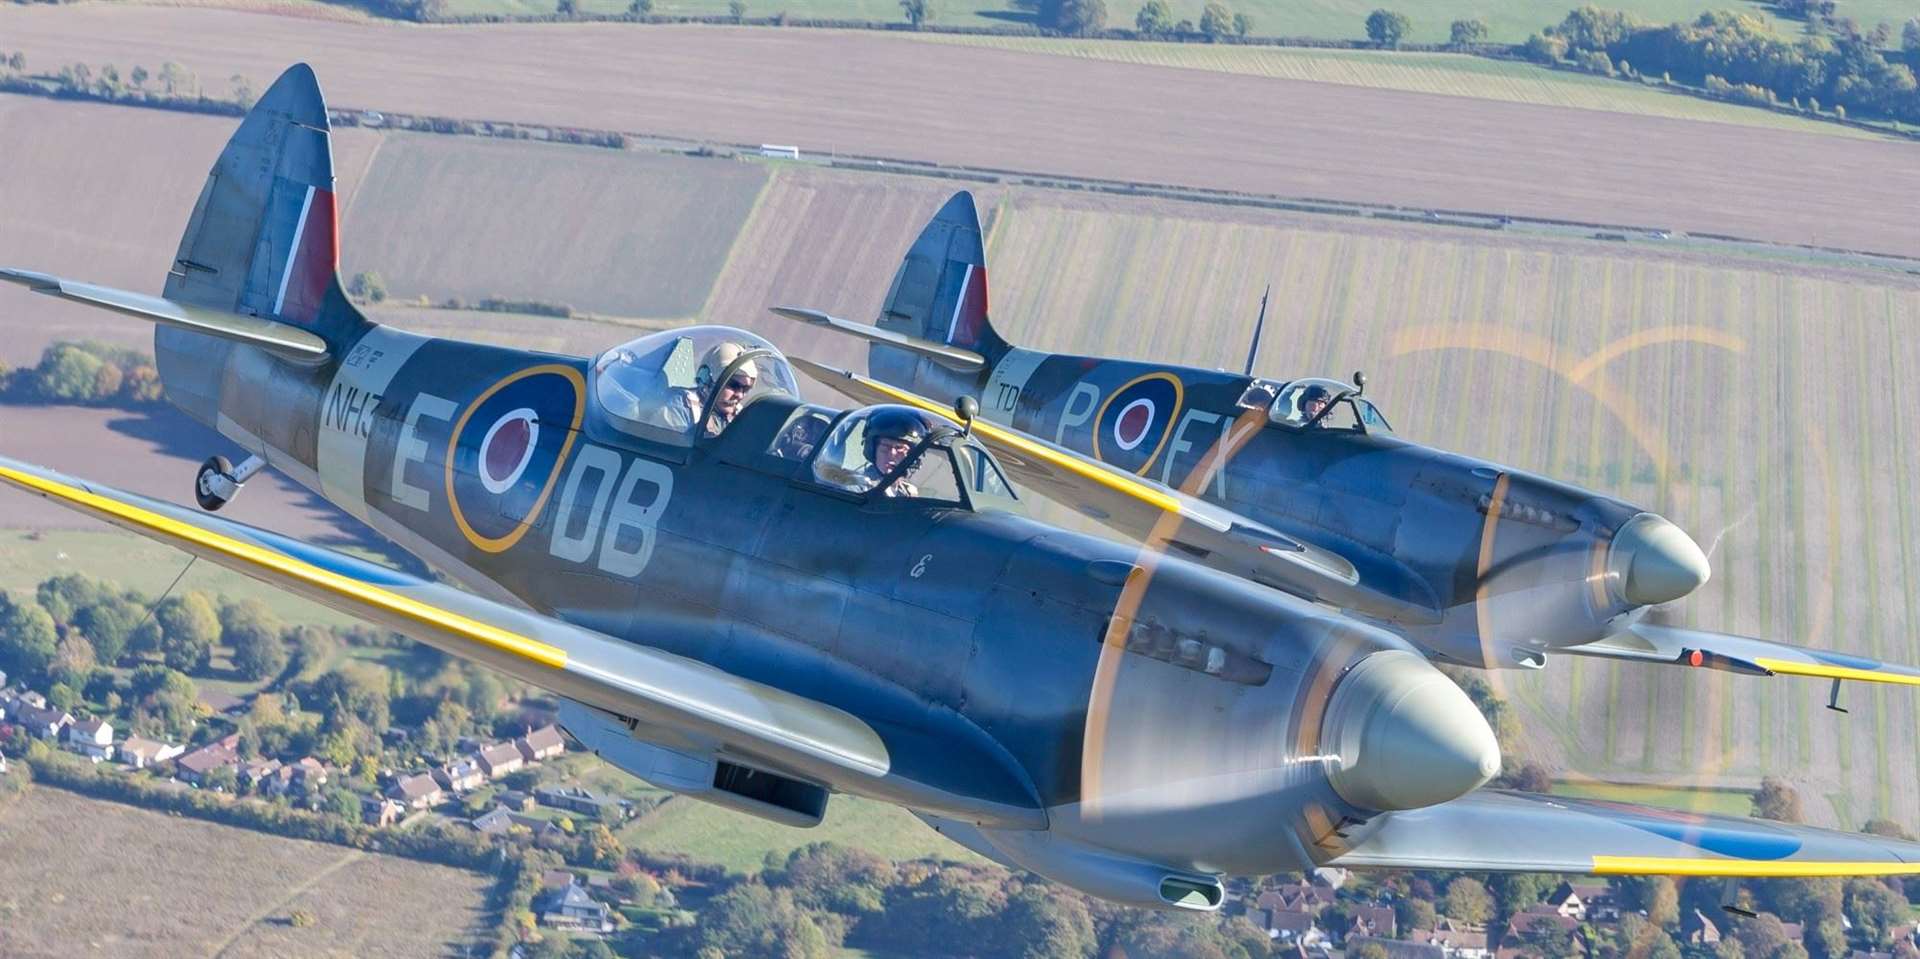 Take your seats, sit back and prepare to be enthralled by the 2019 Battle of Britain Airshow provided by Aero Legends. (12840950)